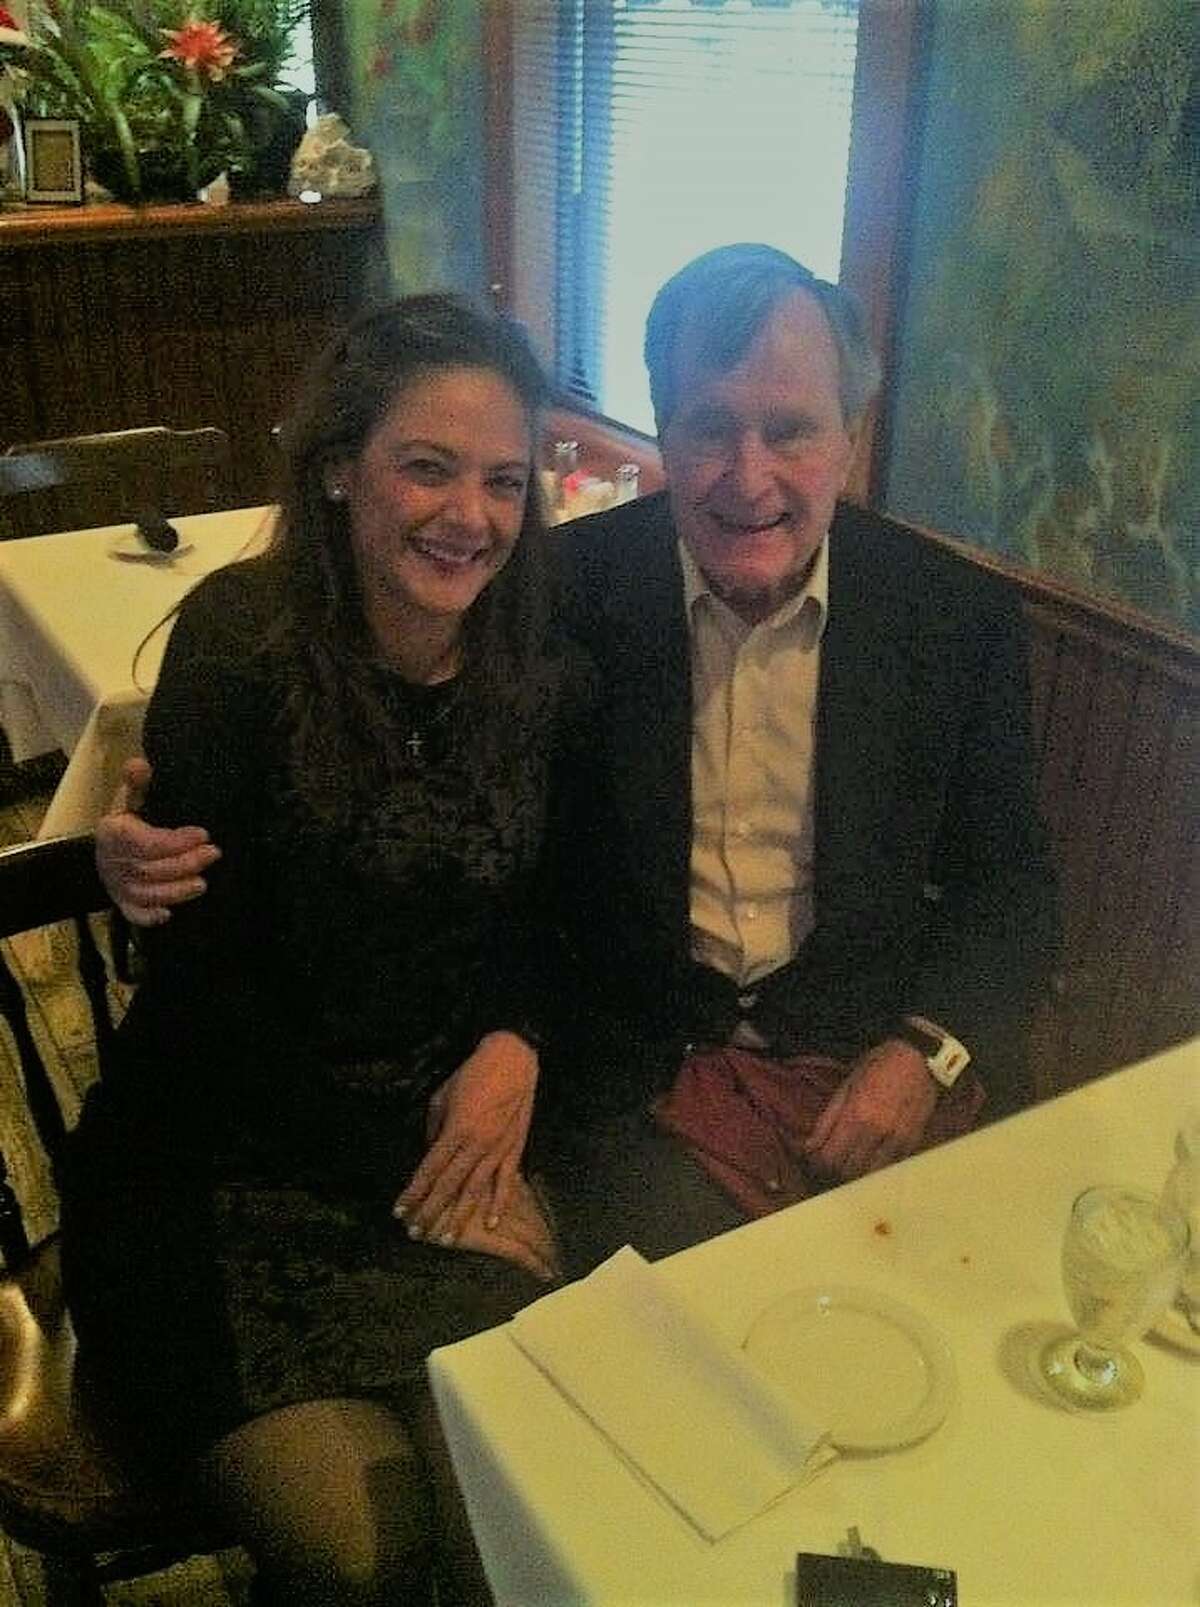 Christie's General Manager Maria Christie posing with President George H.W. Bush, who passed away on Friday.